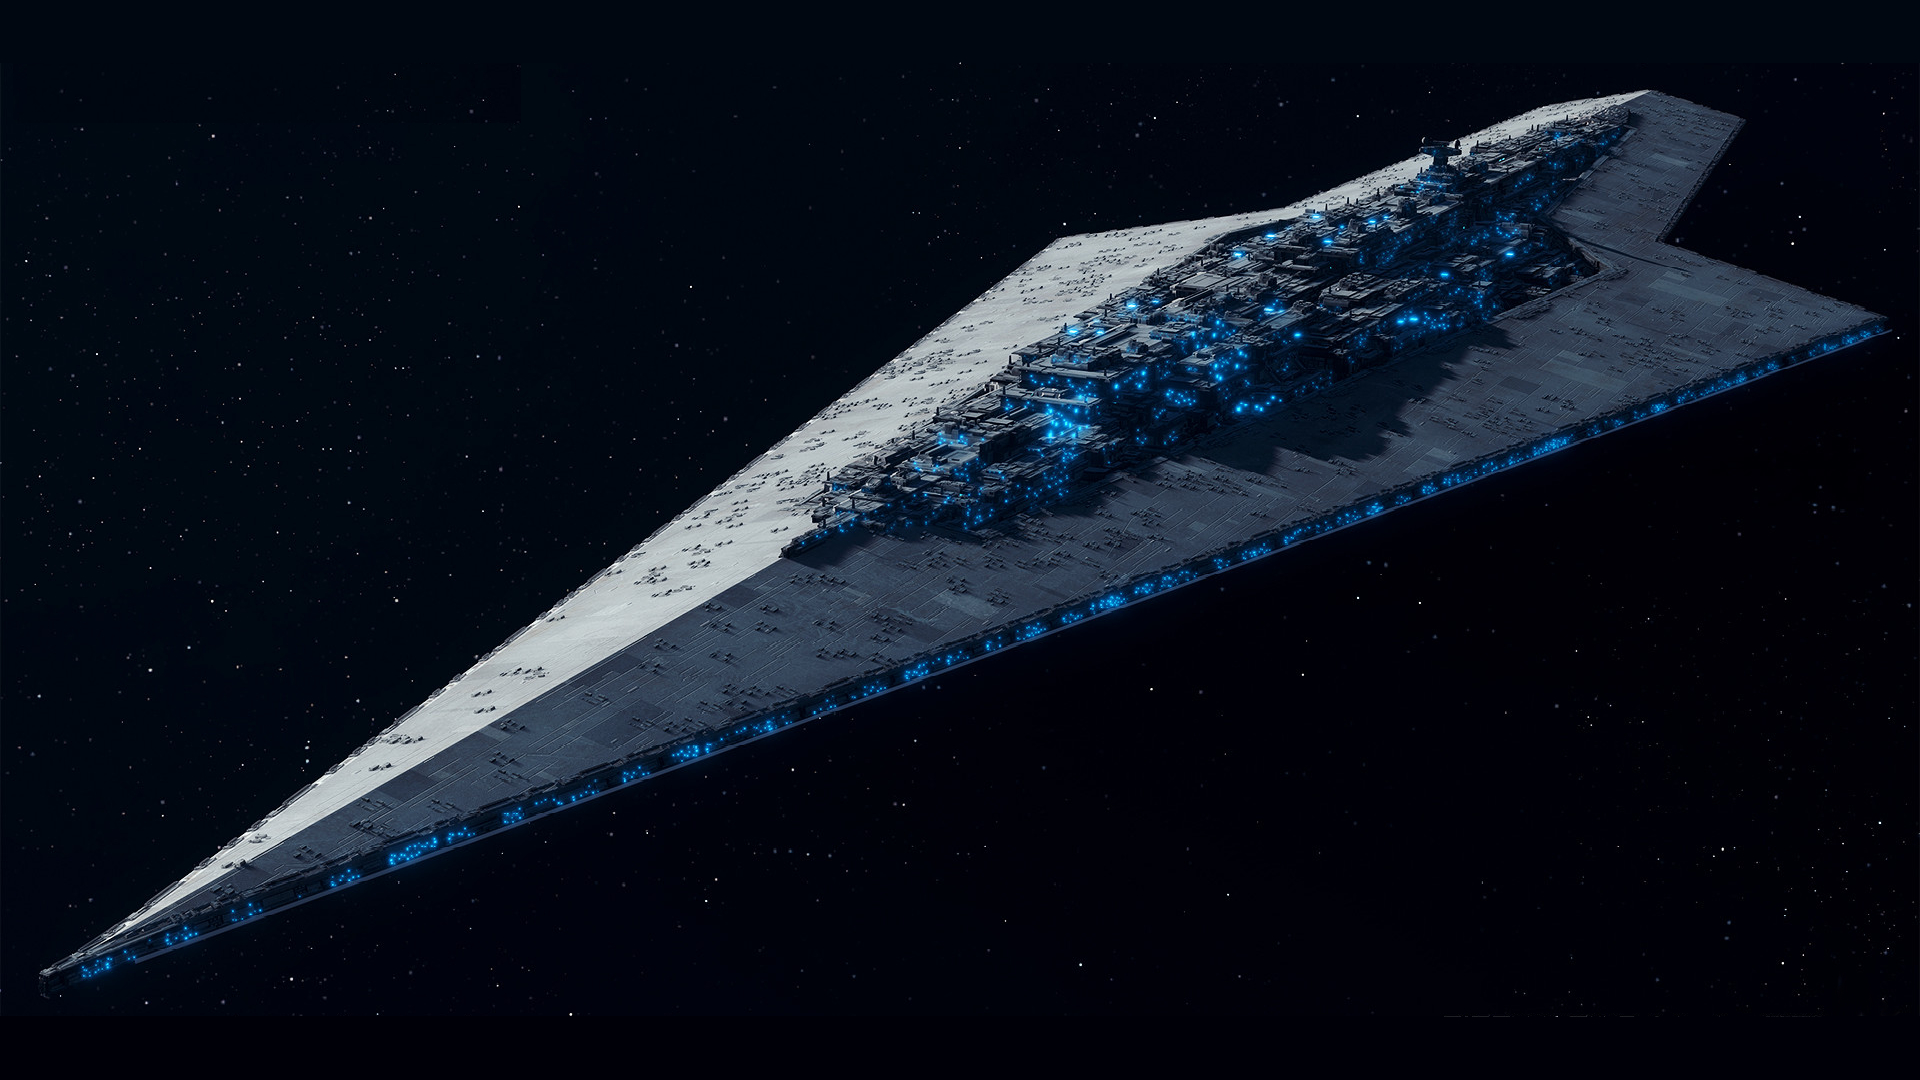 1920x1080 Super Star Destroyer Executor; [not OC] : r/wallpapers